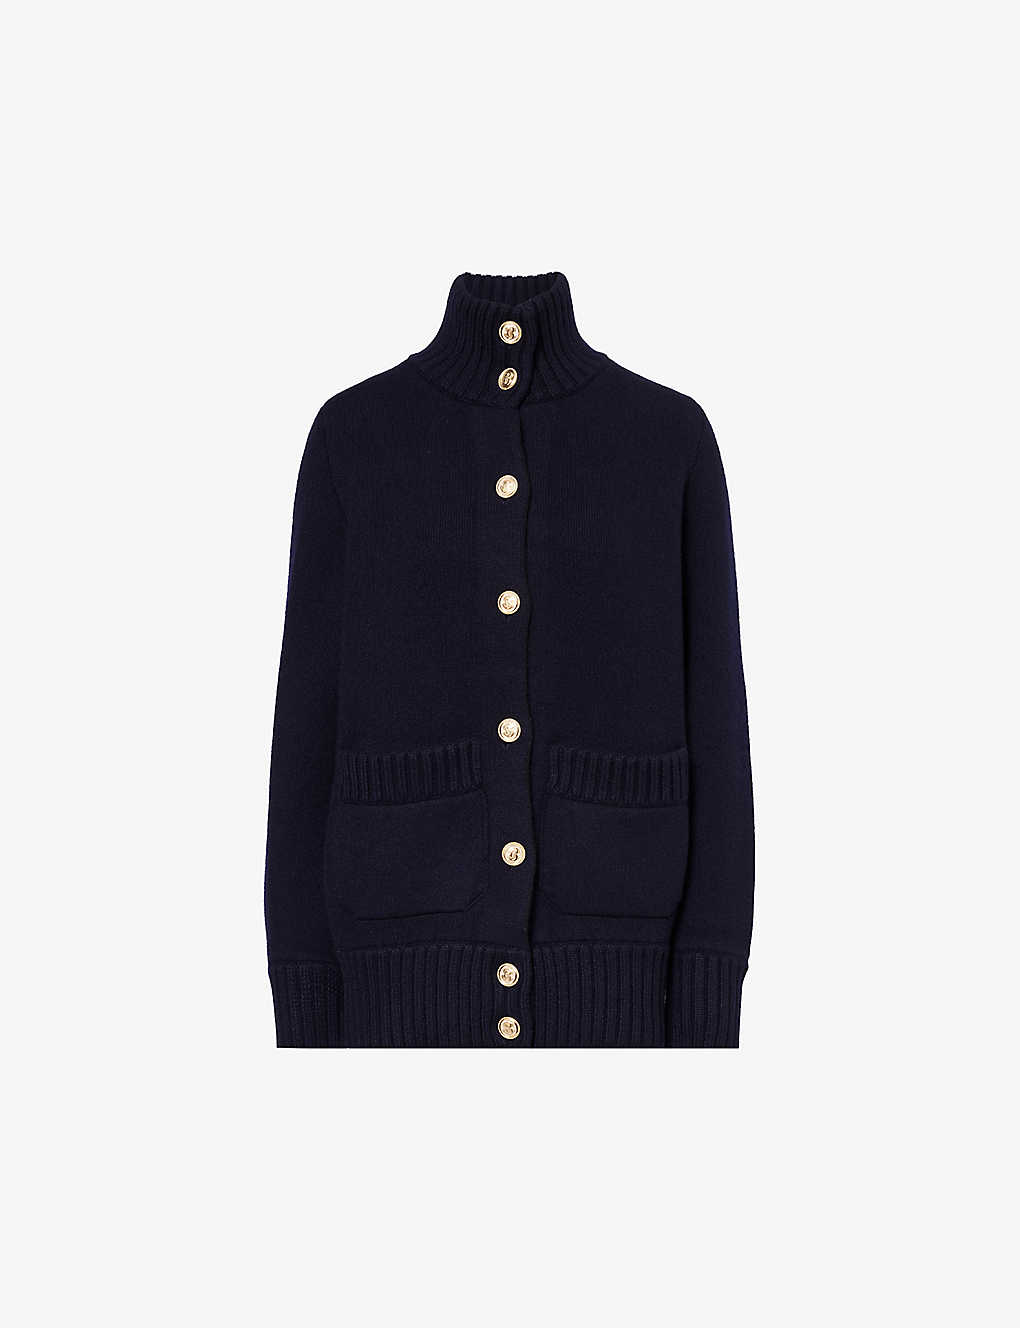 Barrie + Sofia Coppola Ribbed Cashmere, Wool And Silk-blend Turtleneck Cardigan In Jet